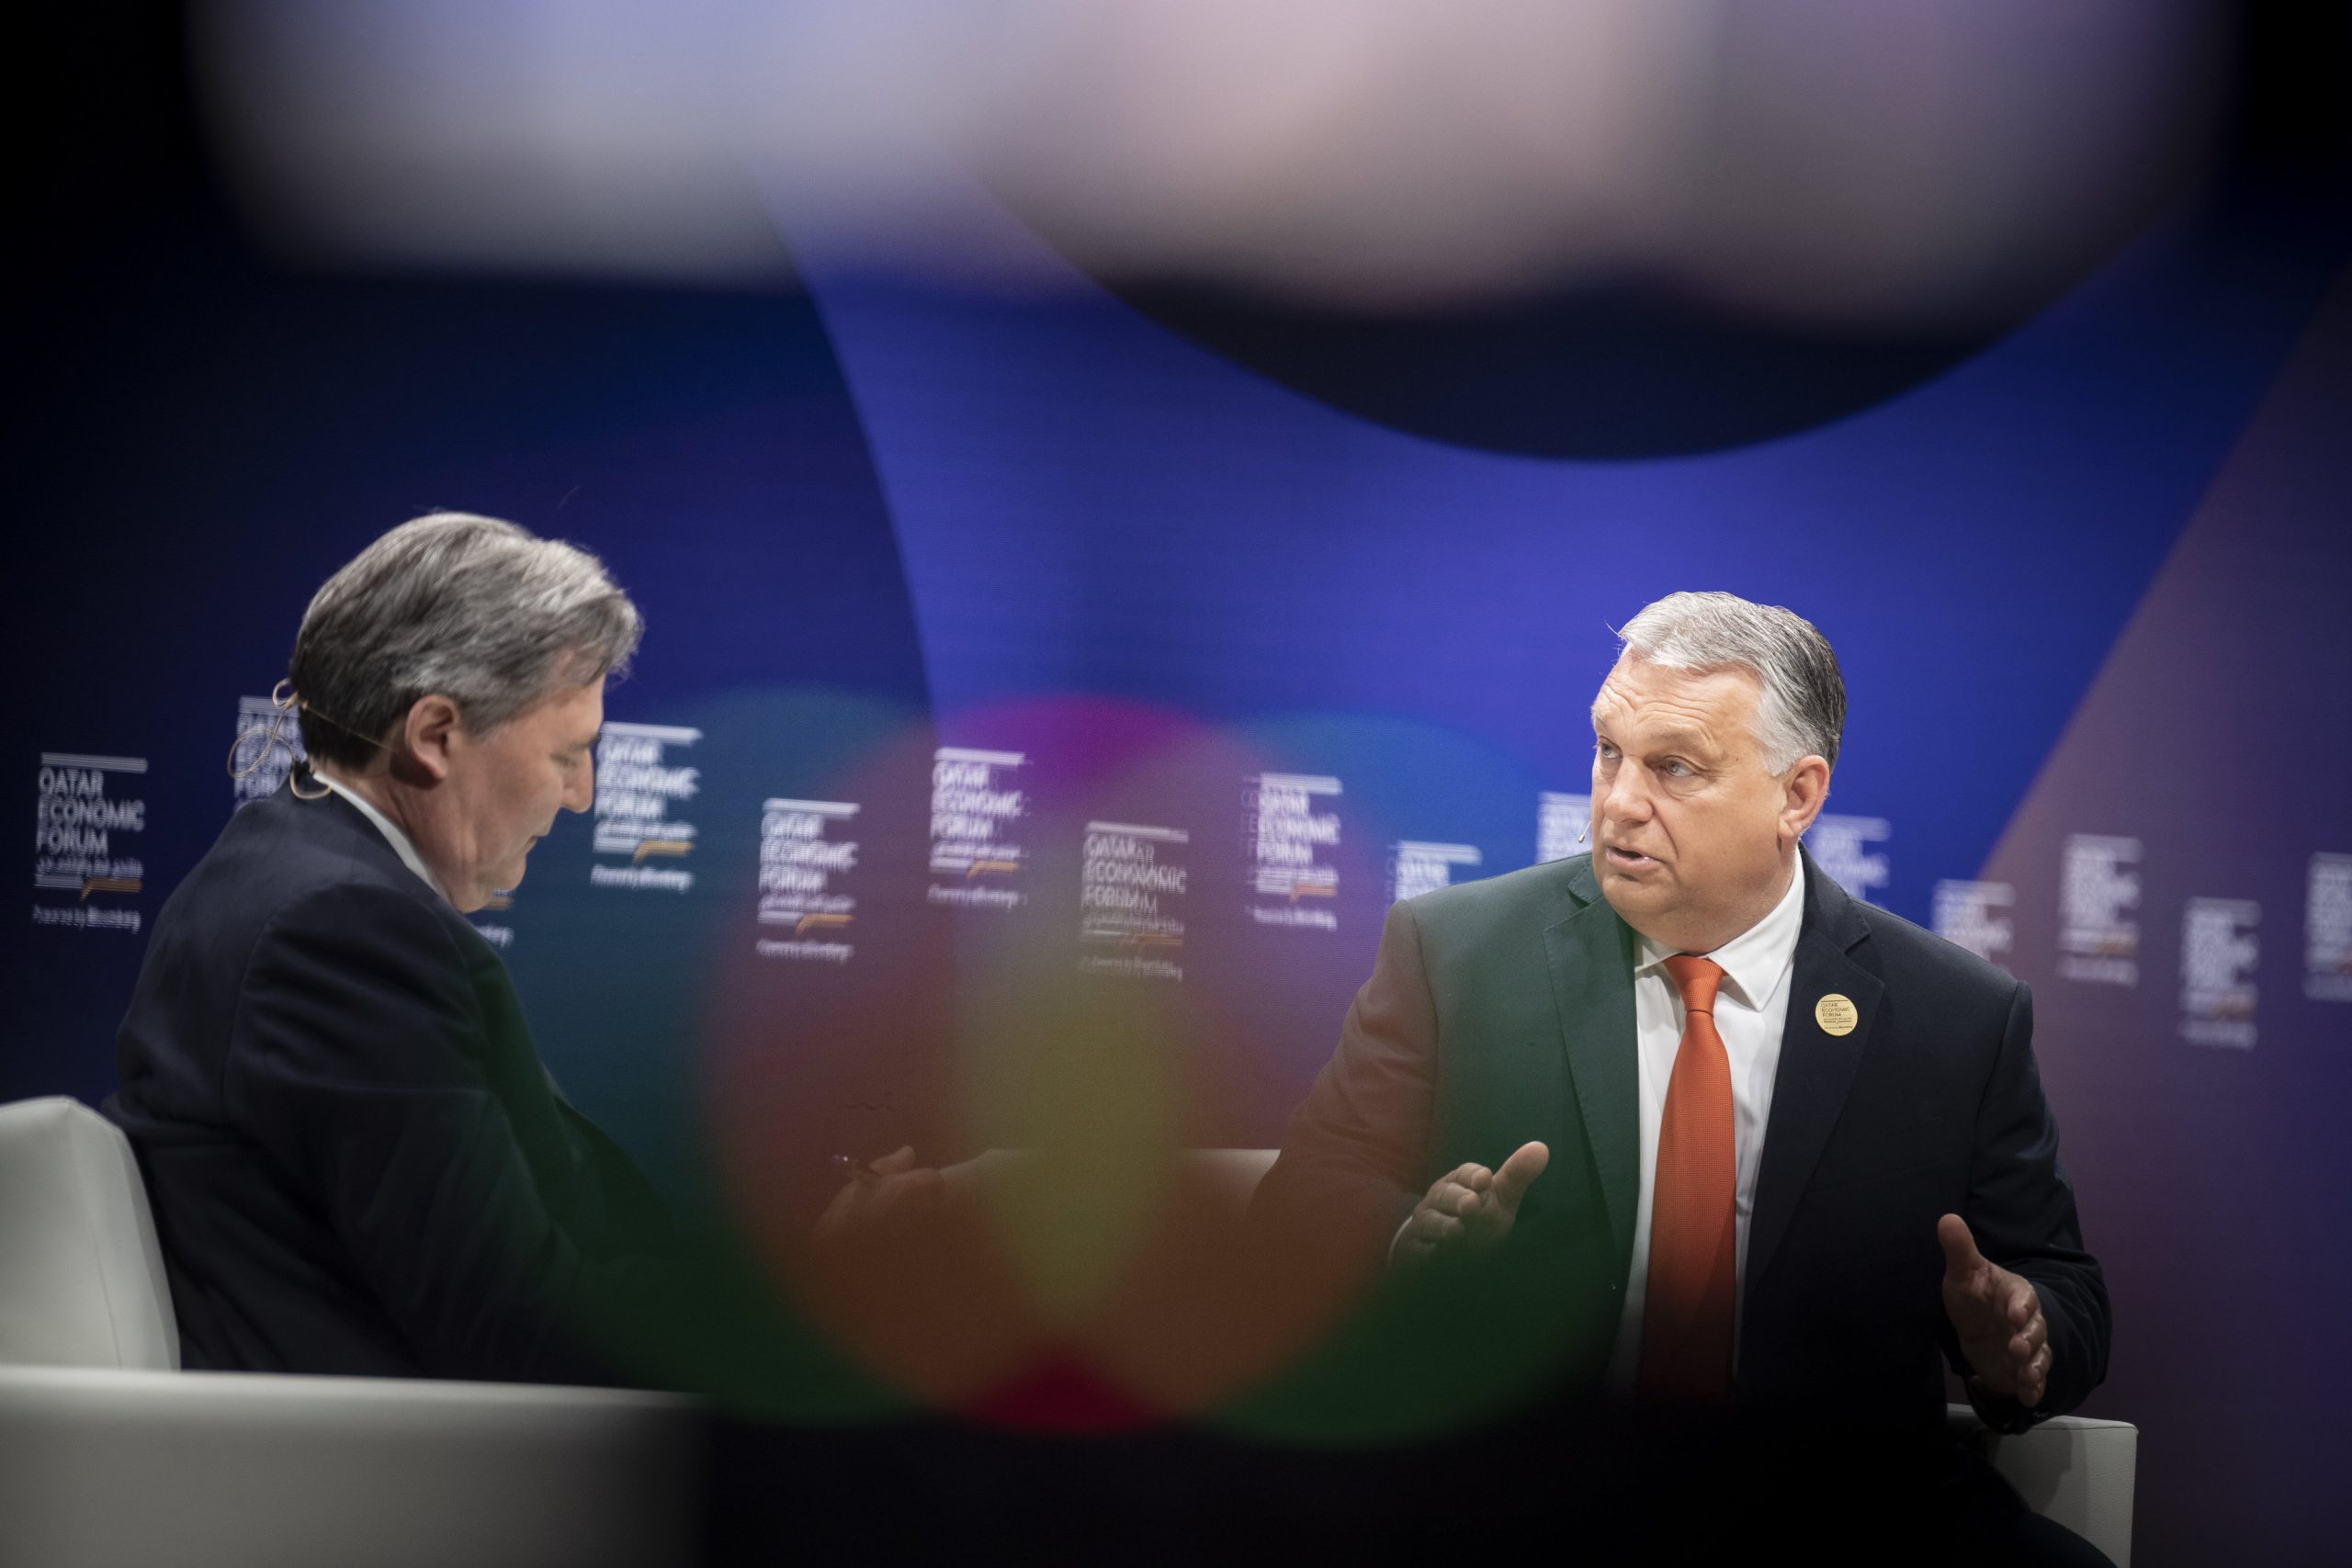 Orbán: Ukraine War a Failure of Diplomacy That Should Never Have Happened